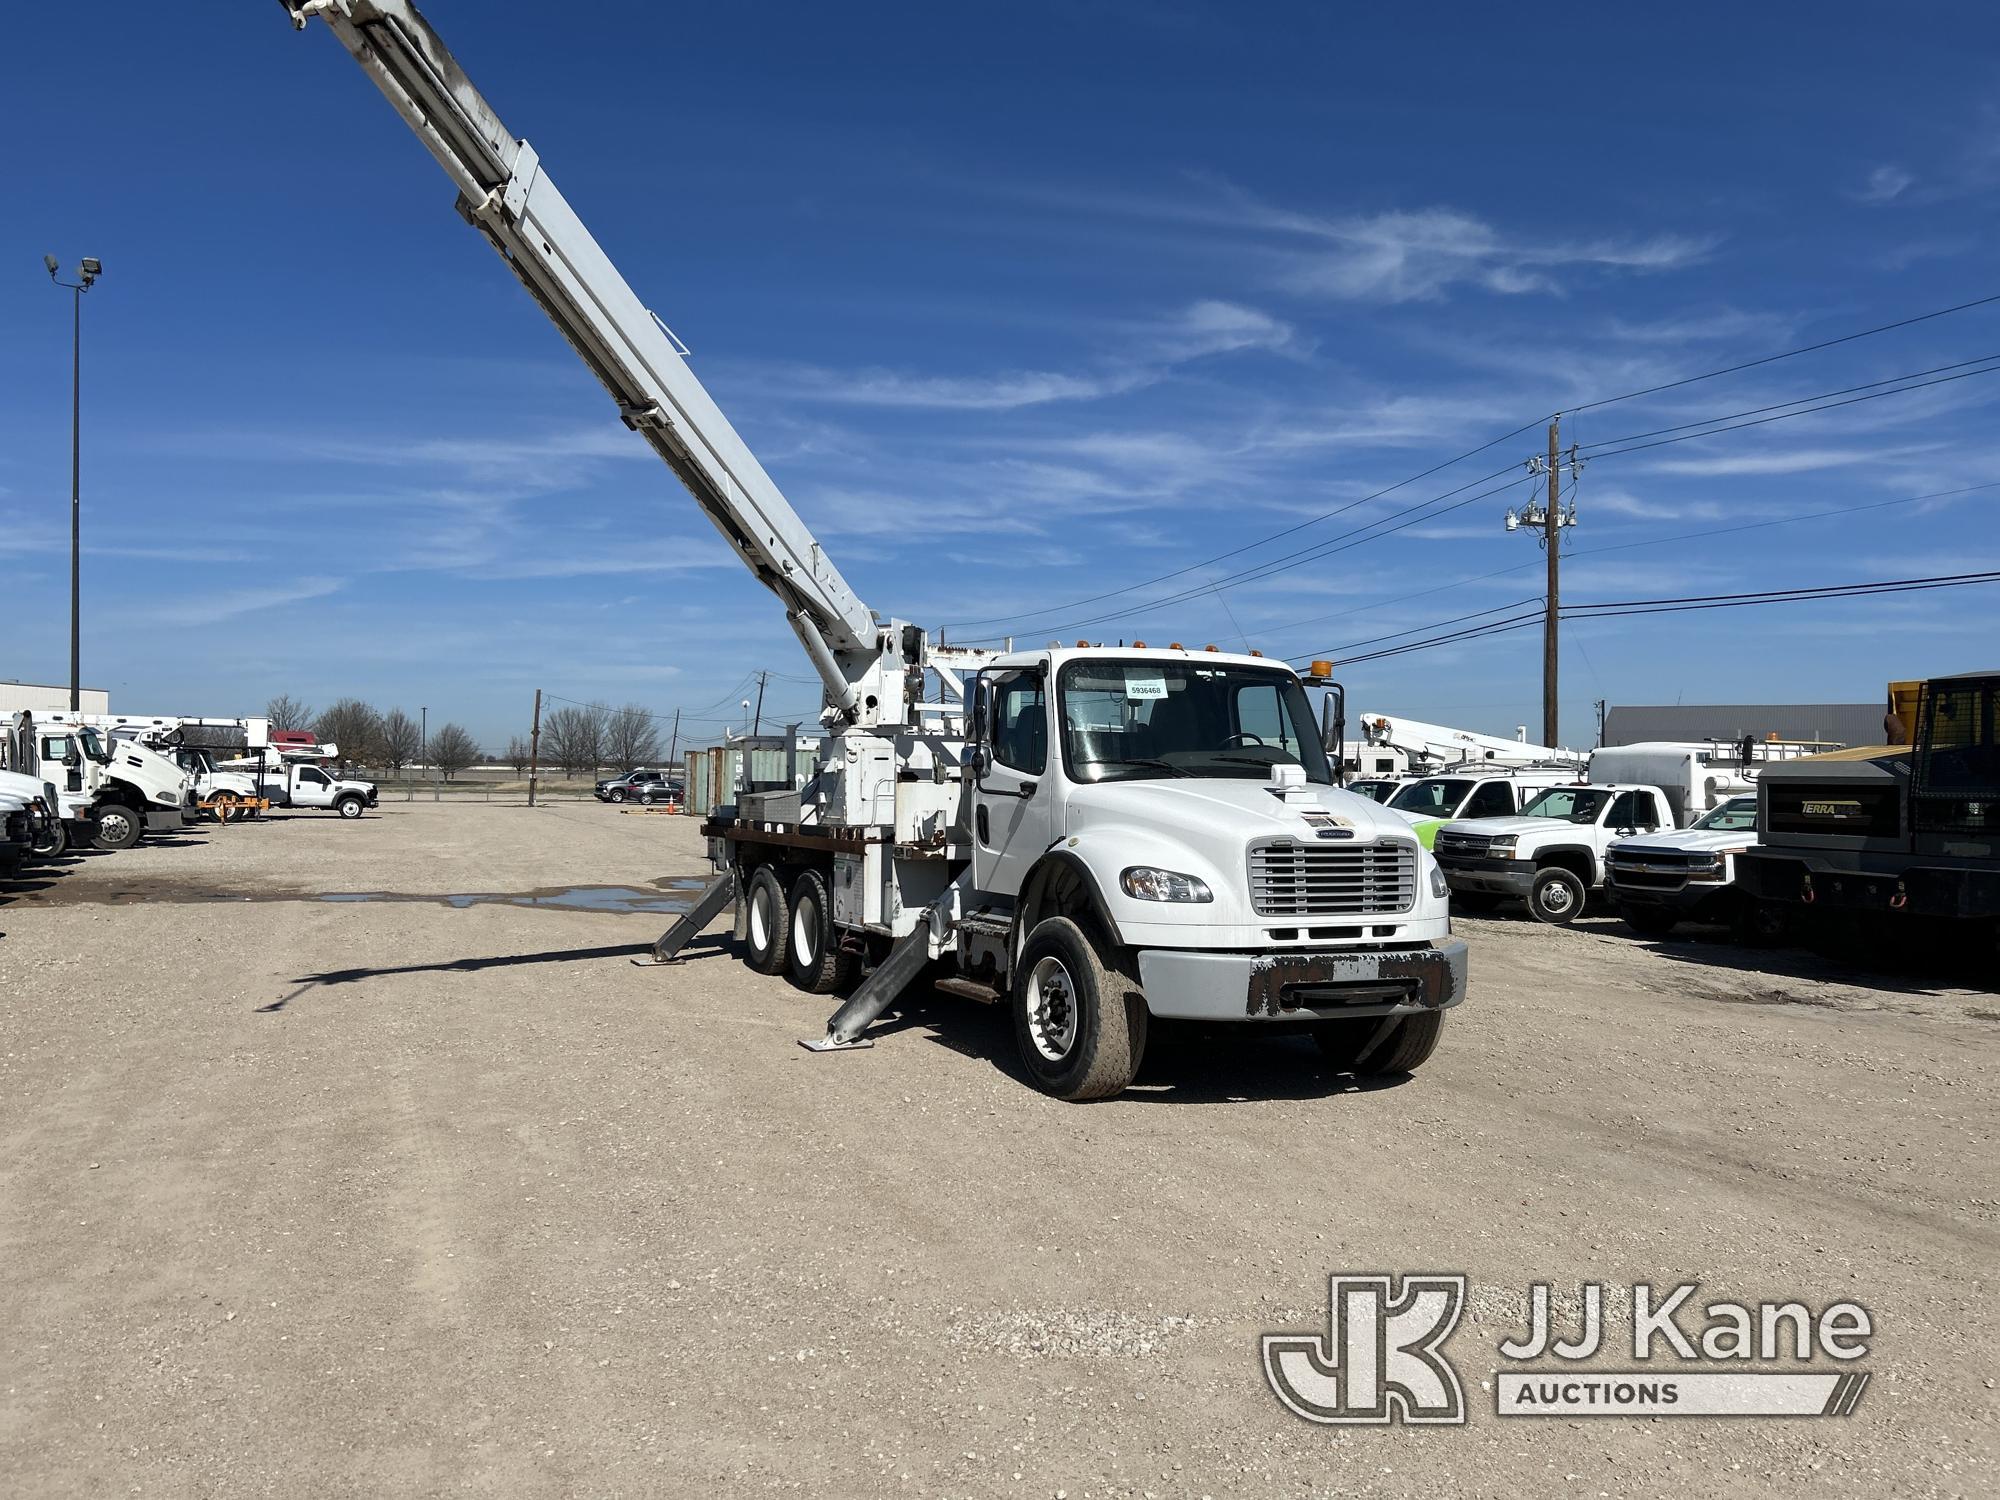 (Waxahachie, TX) Altec D3055-TR, Digger Derrick rear mounted on 2015 Freightliner M2 106 T/A Flatbed